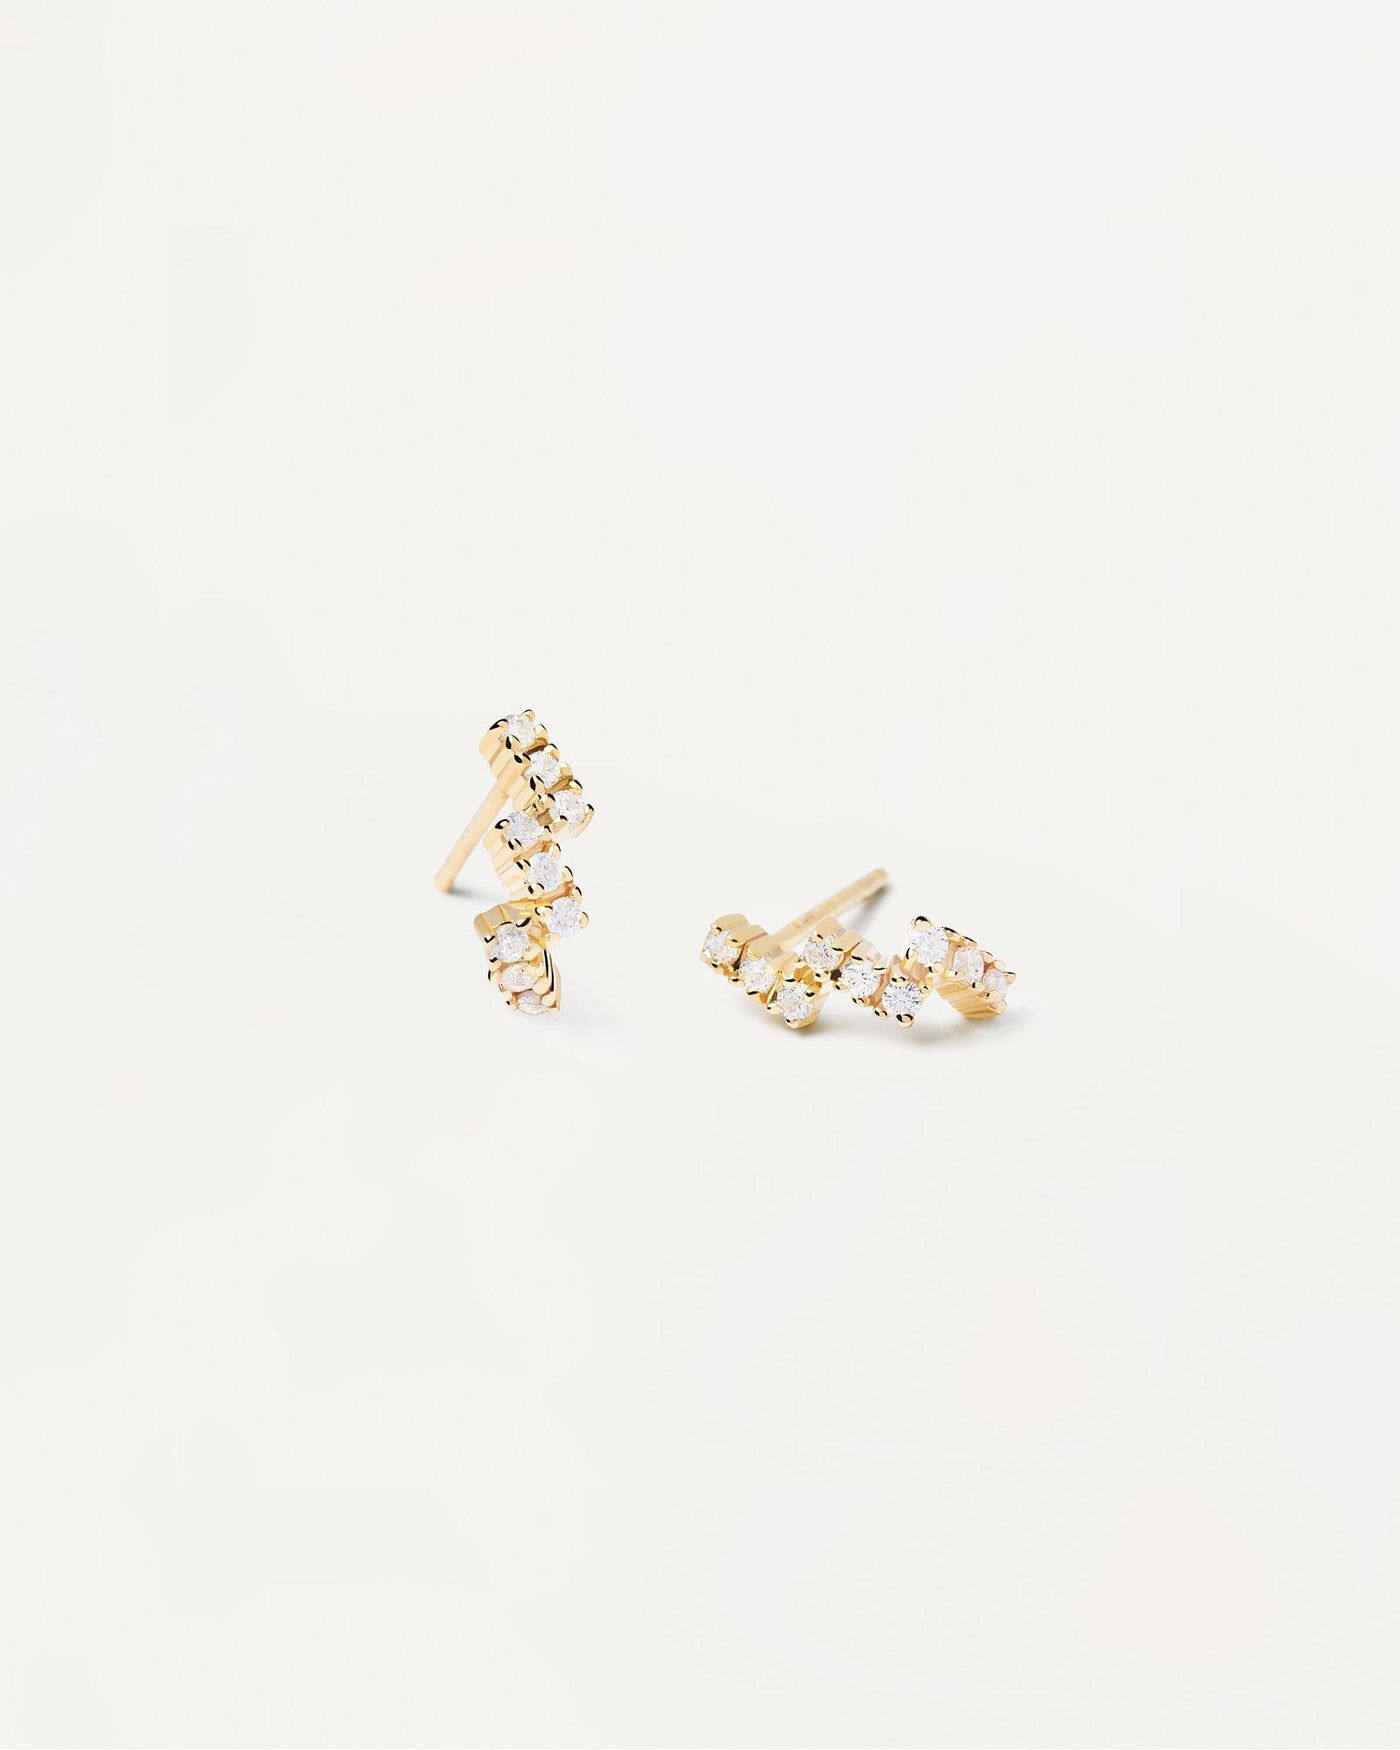 2024 Selection | The Zipper Earrings. Zigzag gold-plated earrings set with white zirconia. Get the latest arrival from PDPAOLA. Place your order safely and get this Best Seller. Free Shipping.